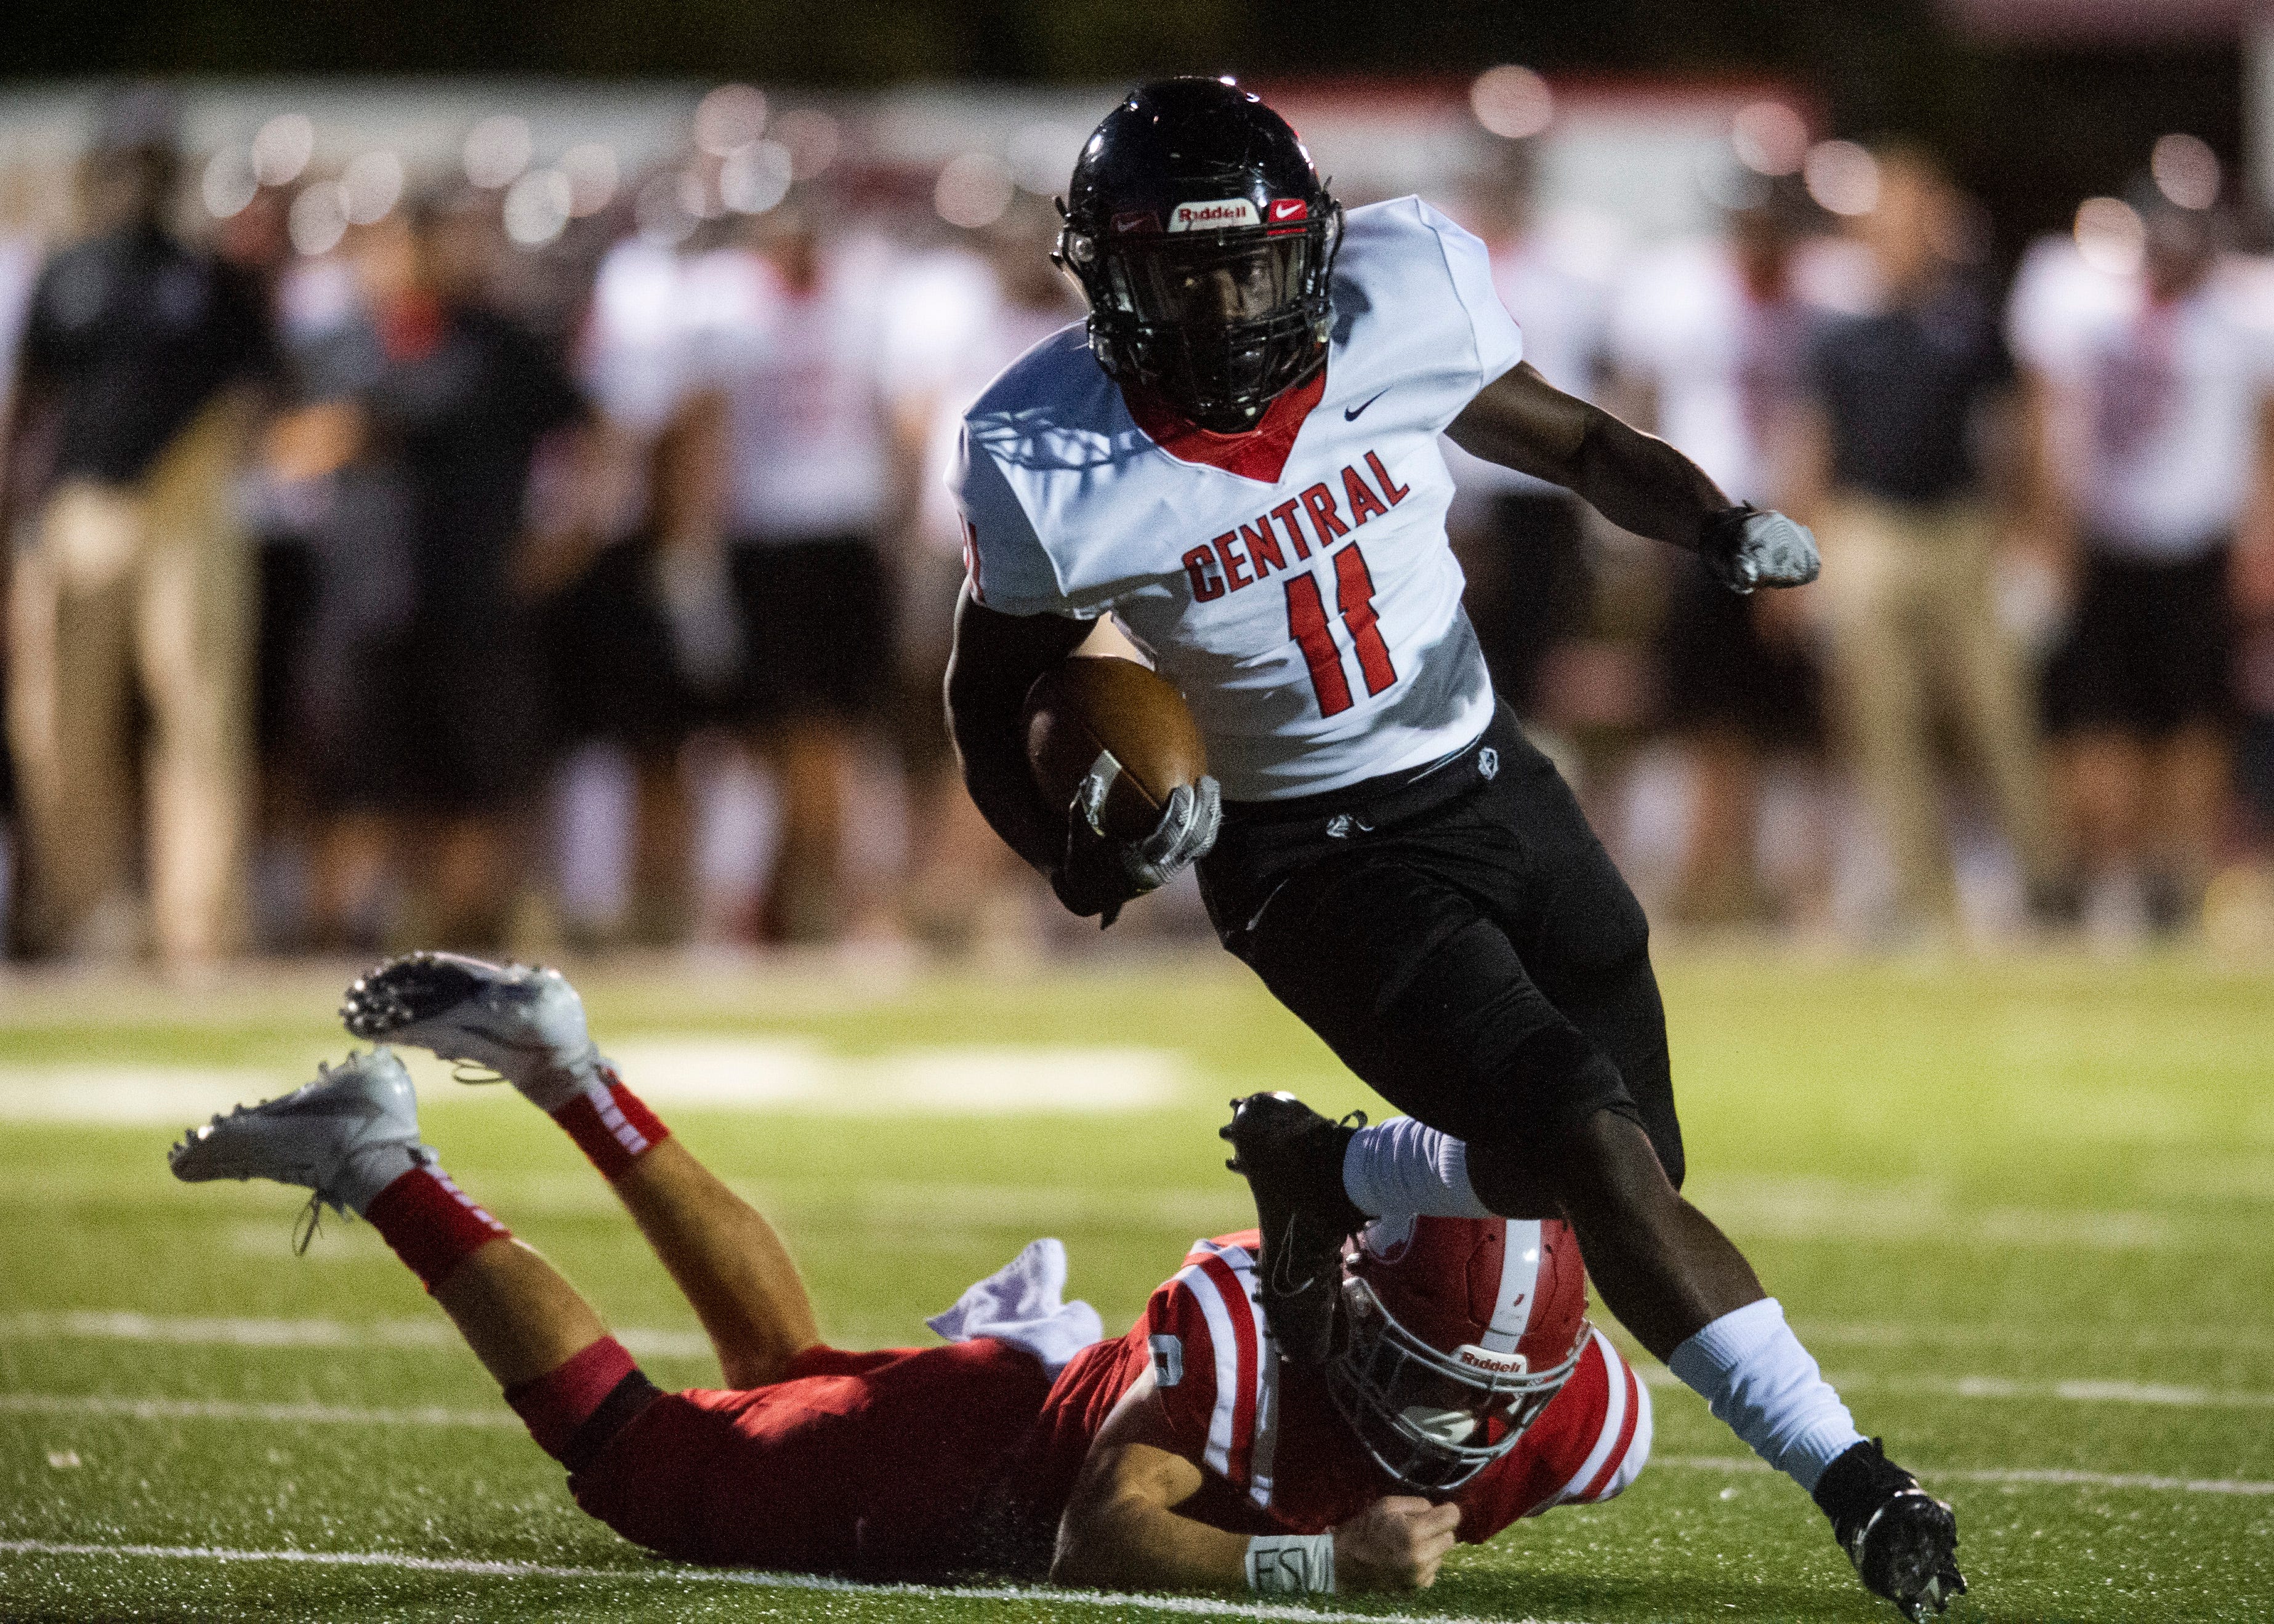 Central's Jason Merritts (11) dodges Halls' Jake Parris (8) during the Halls and Central high school football game on Friday, October 4, 2019 at Halls High School.